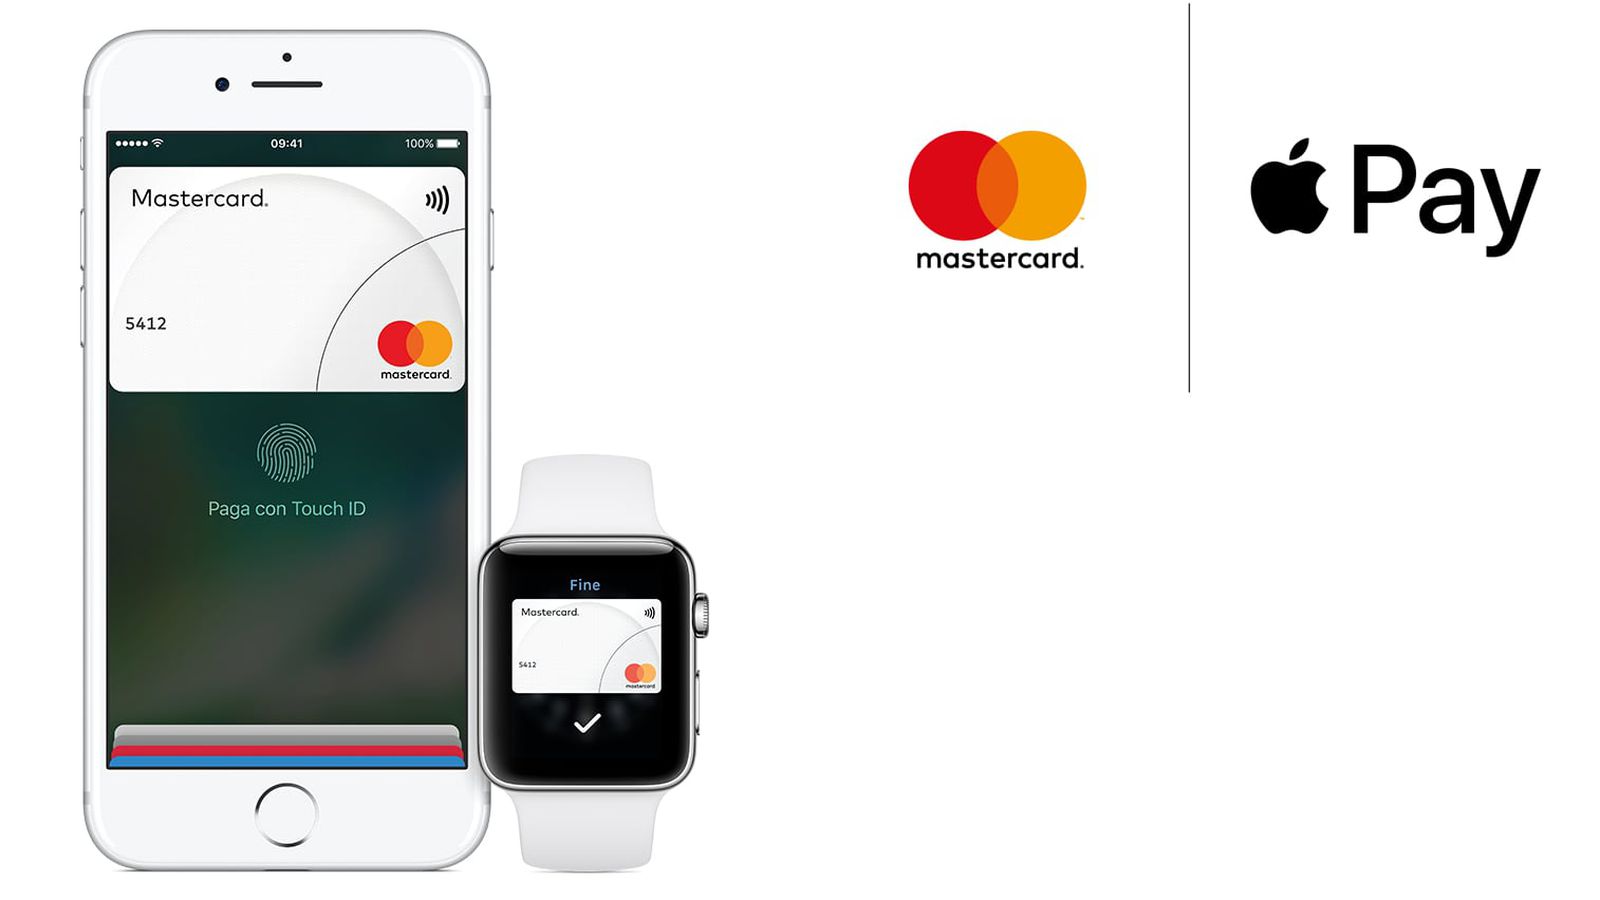 Outage Preventing Mastercards From Being Added to Apple Pay - macrumors.com